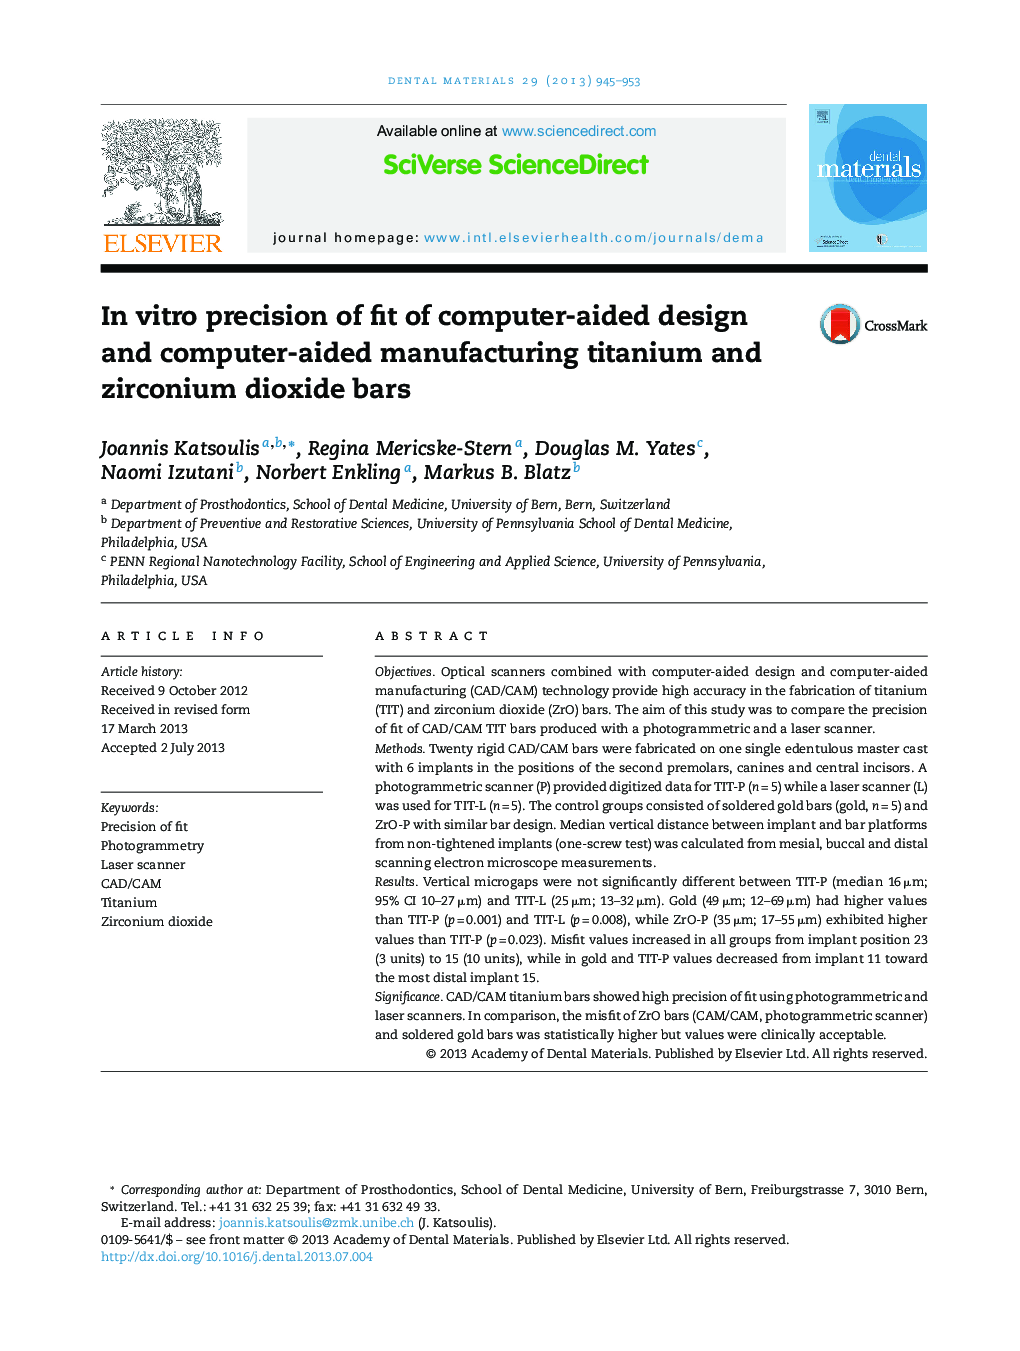 In vitro precision of fit of computer-aided design and computer-aided manufacturing titanium and zirconium dioxide bars